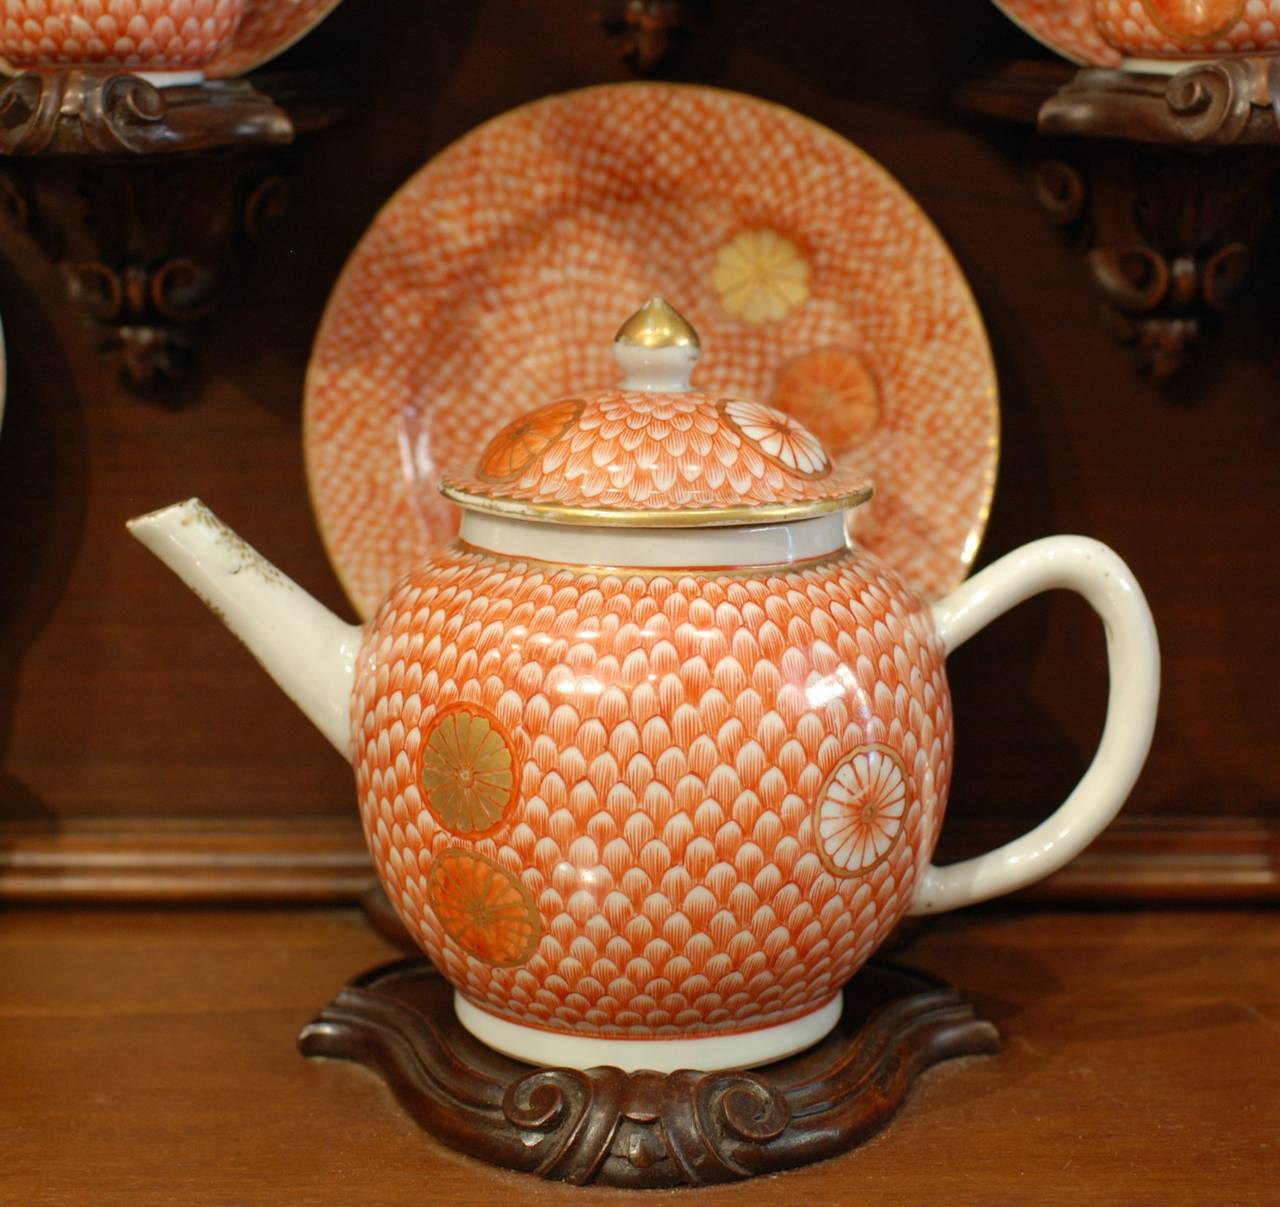 Tea set with 12 cups and saucers, a teapot, a sugar bowl and a small pot, Japanese inspired decorations made in China for the European market in the 18th century. The display cabinet, circa 1900.